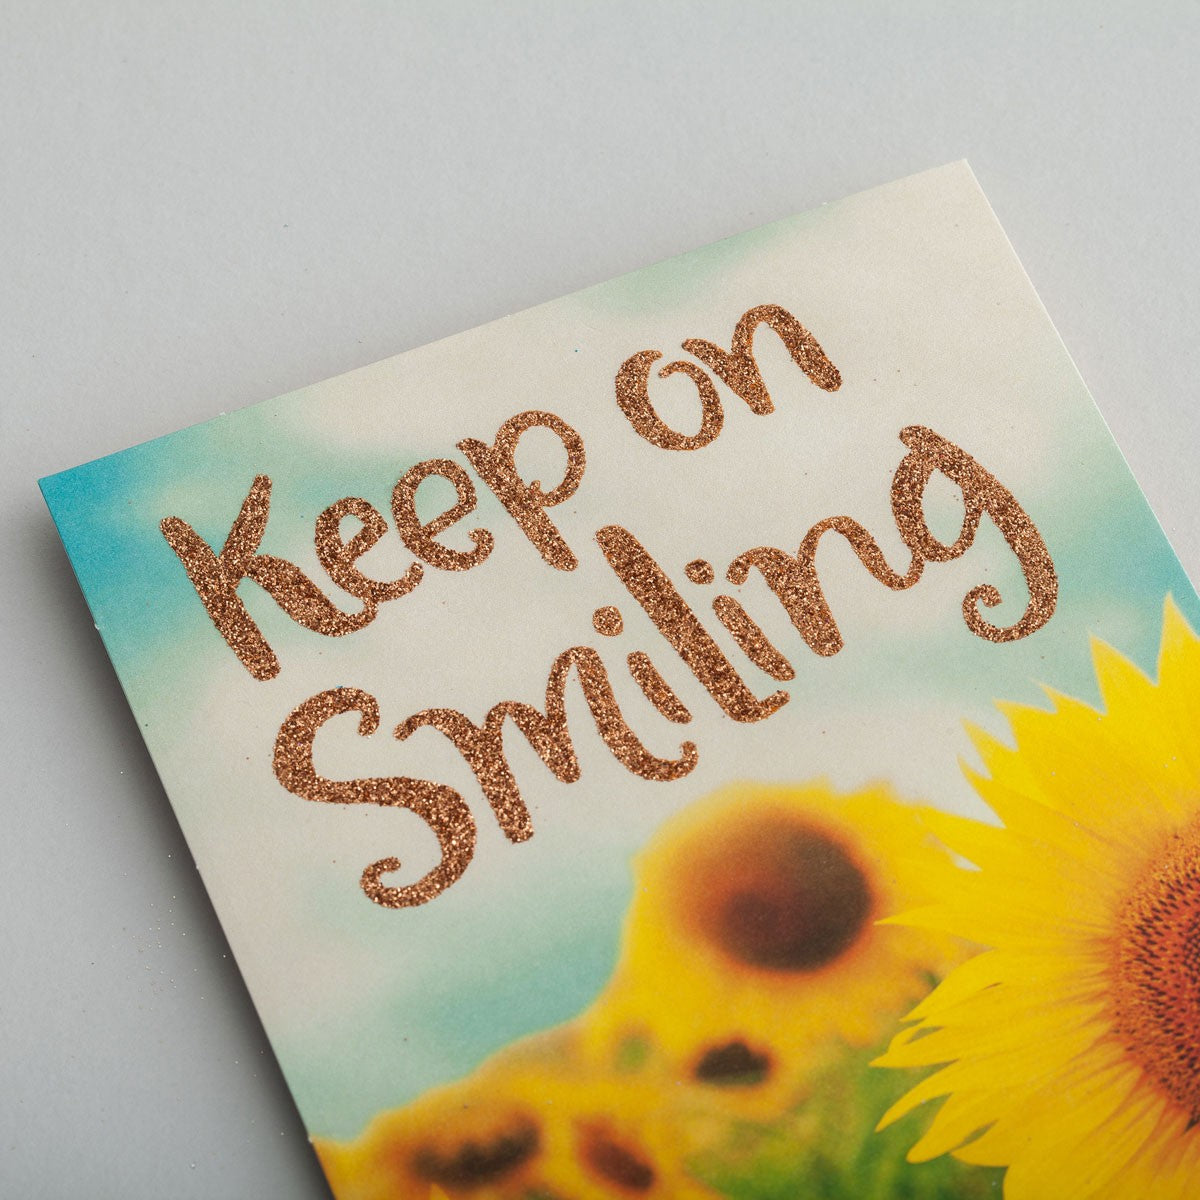 All Occasion - Keep Smiling Card - Southern Grace Creations